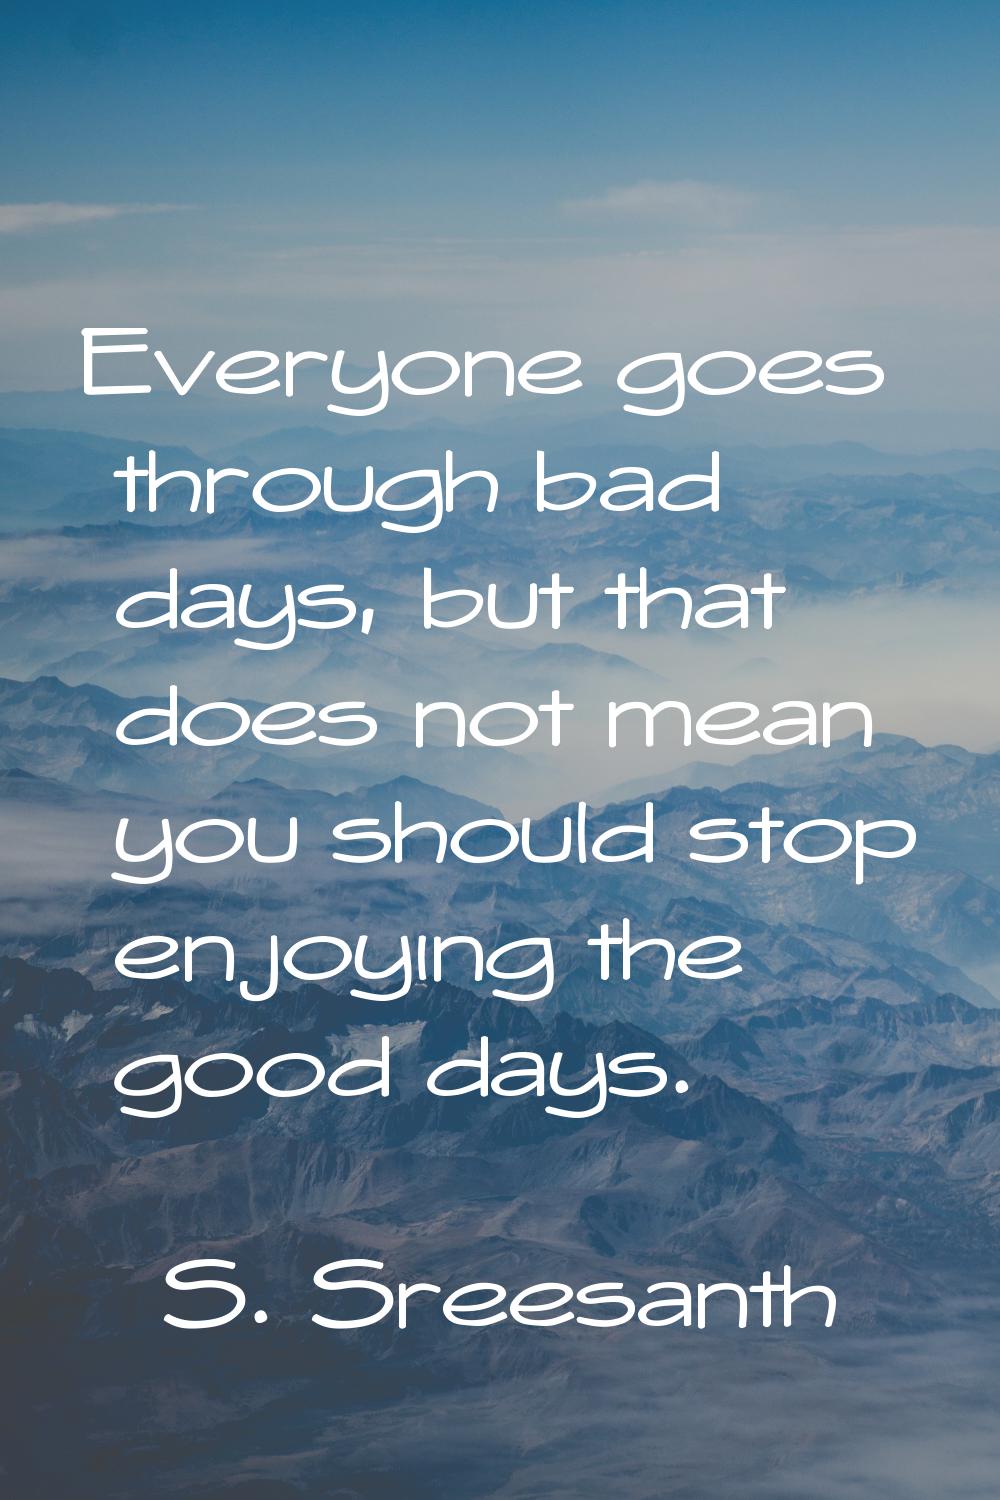 Everyone goes through bad days, but that does not mean you should stop enjoying the good days.